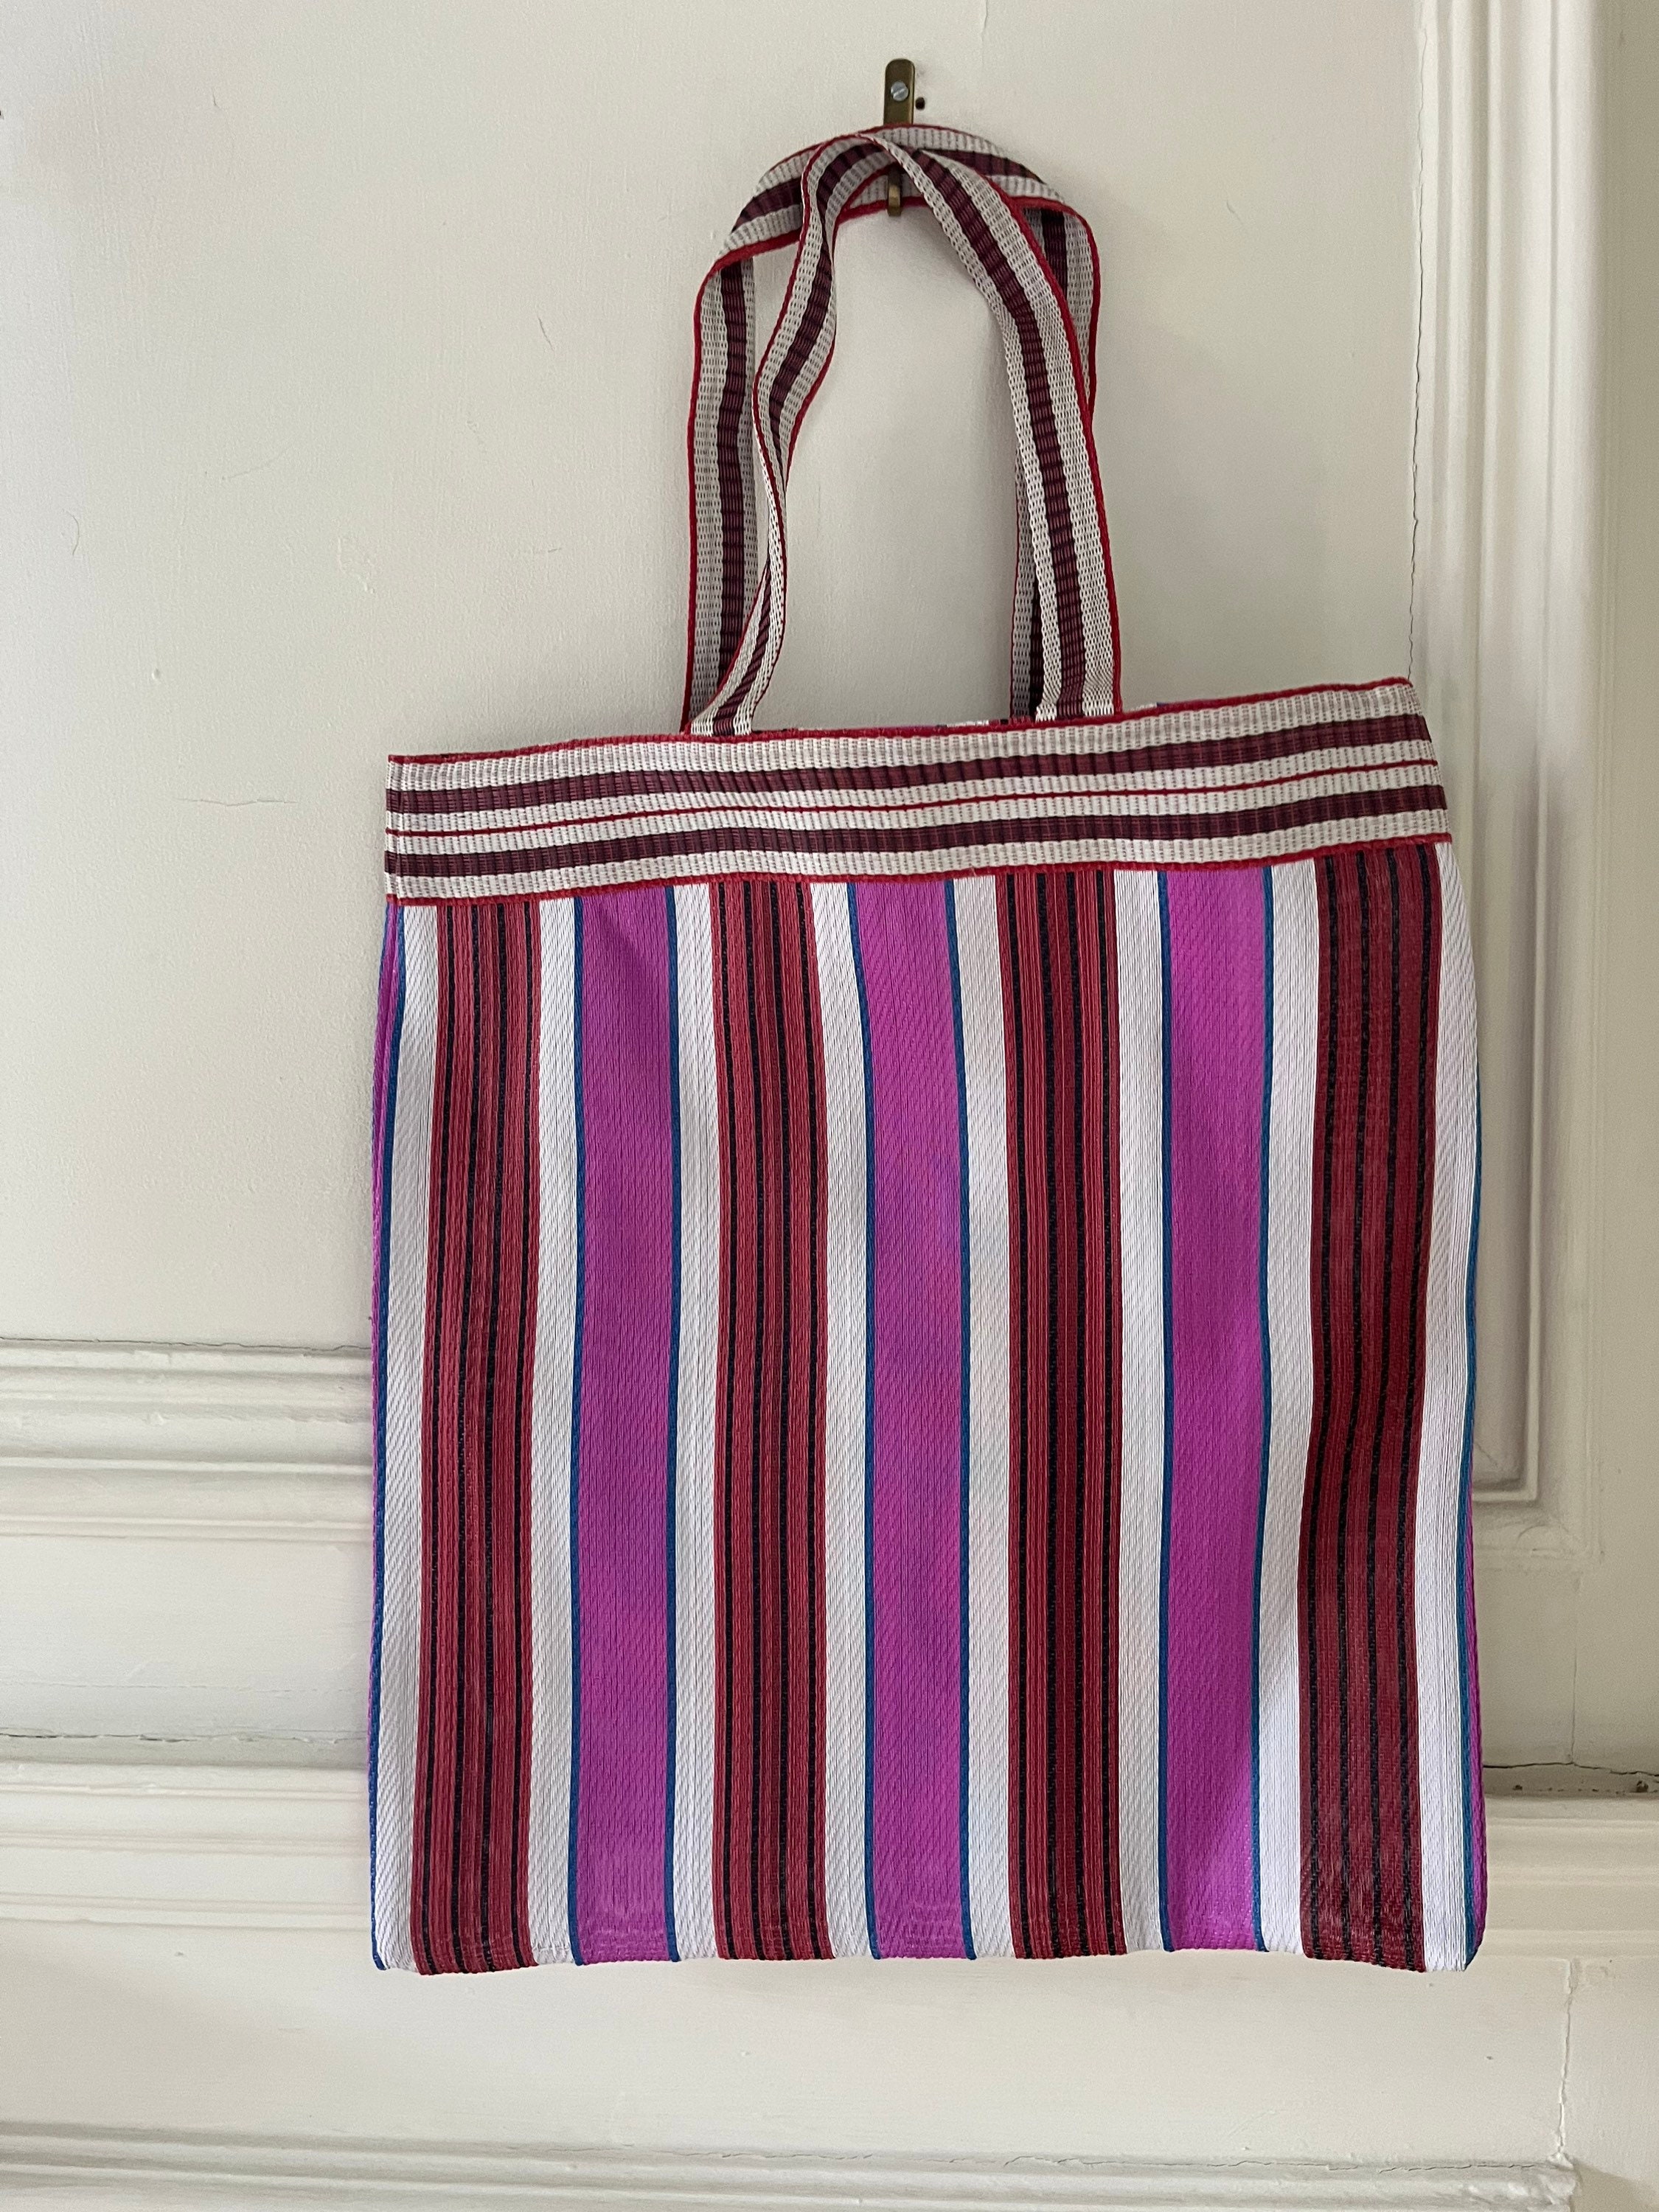 Recycled Plastic Stripe Market Bag From India photo picture